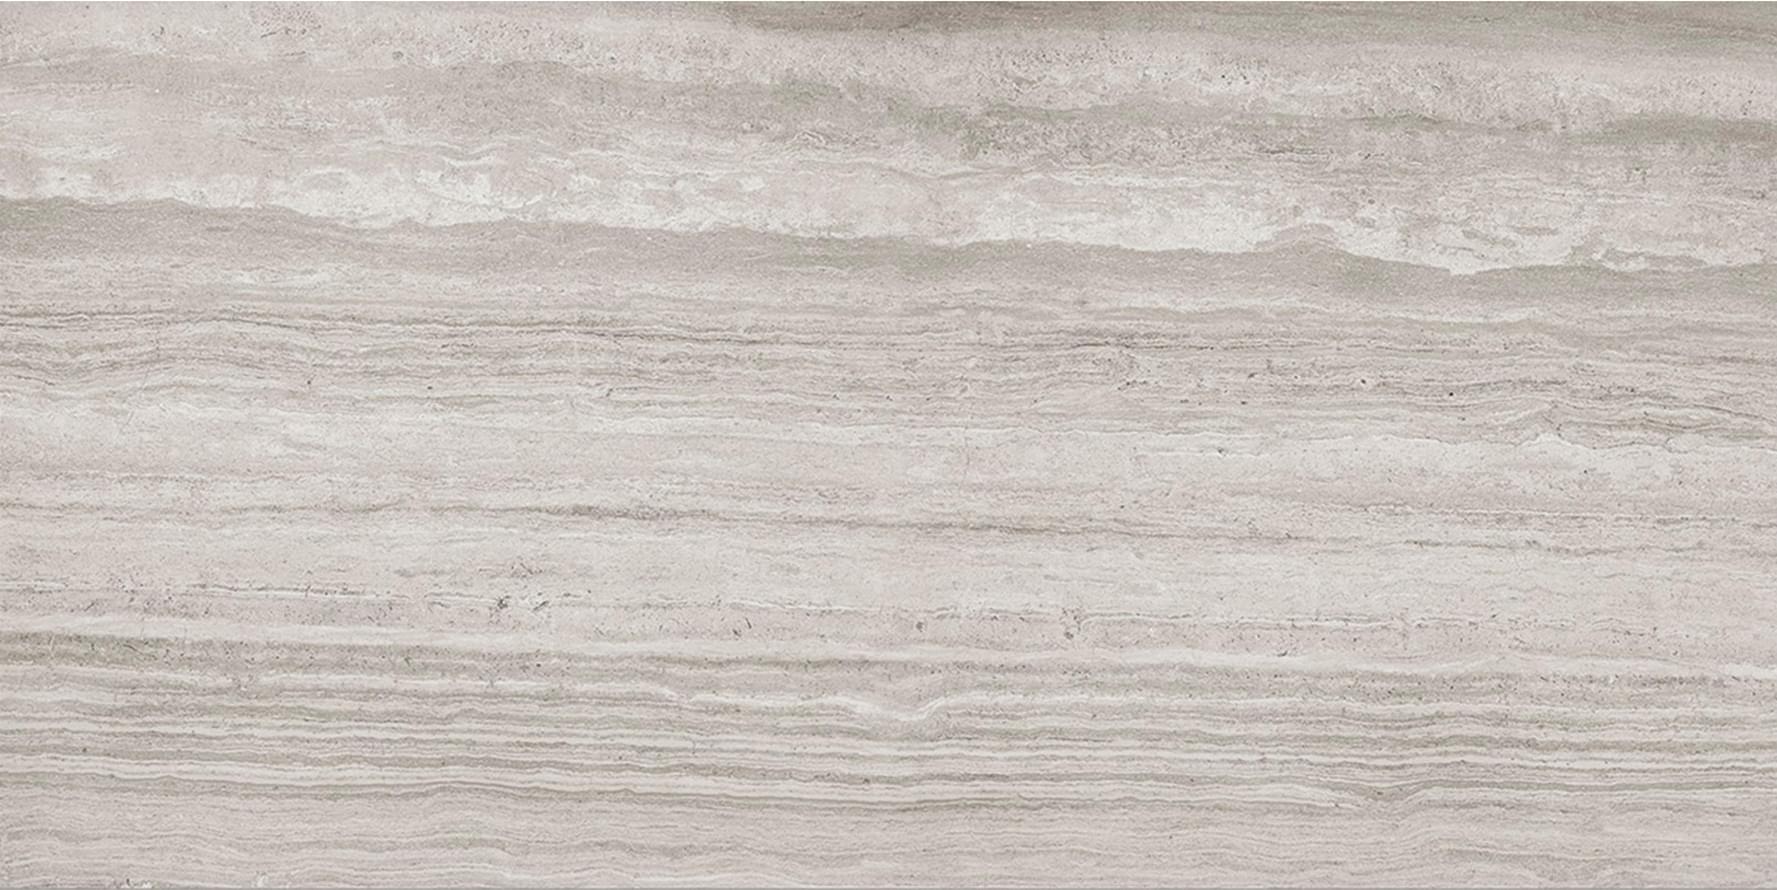 Magica Marstood Marble 02 Silver Travertine Polished Rectified 30x60